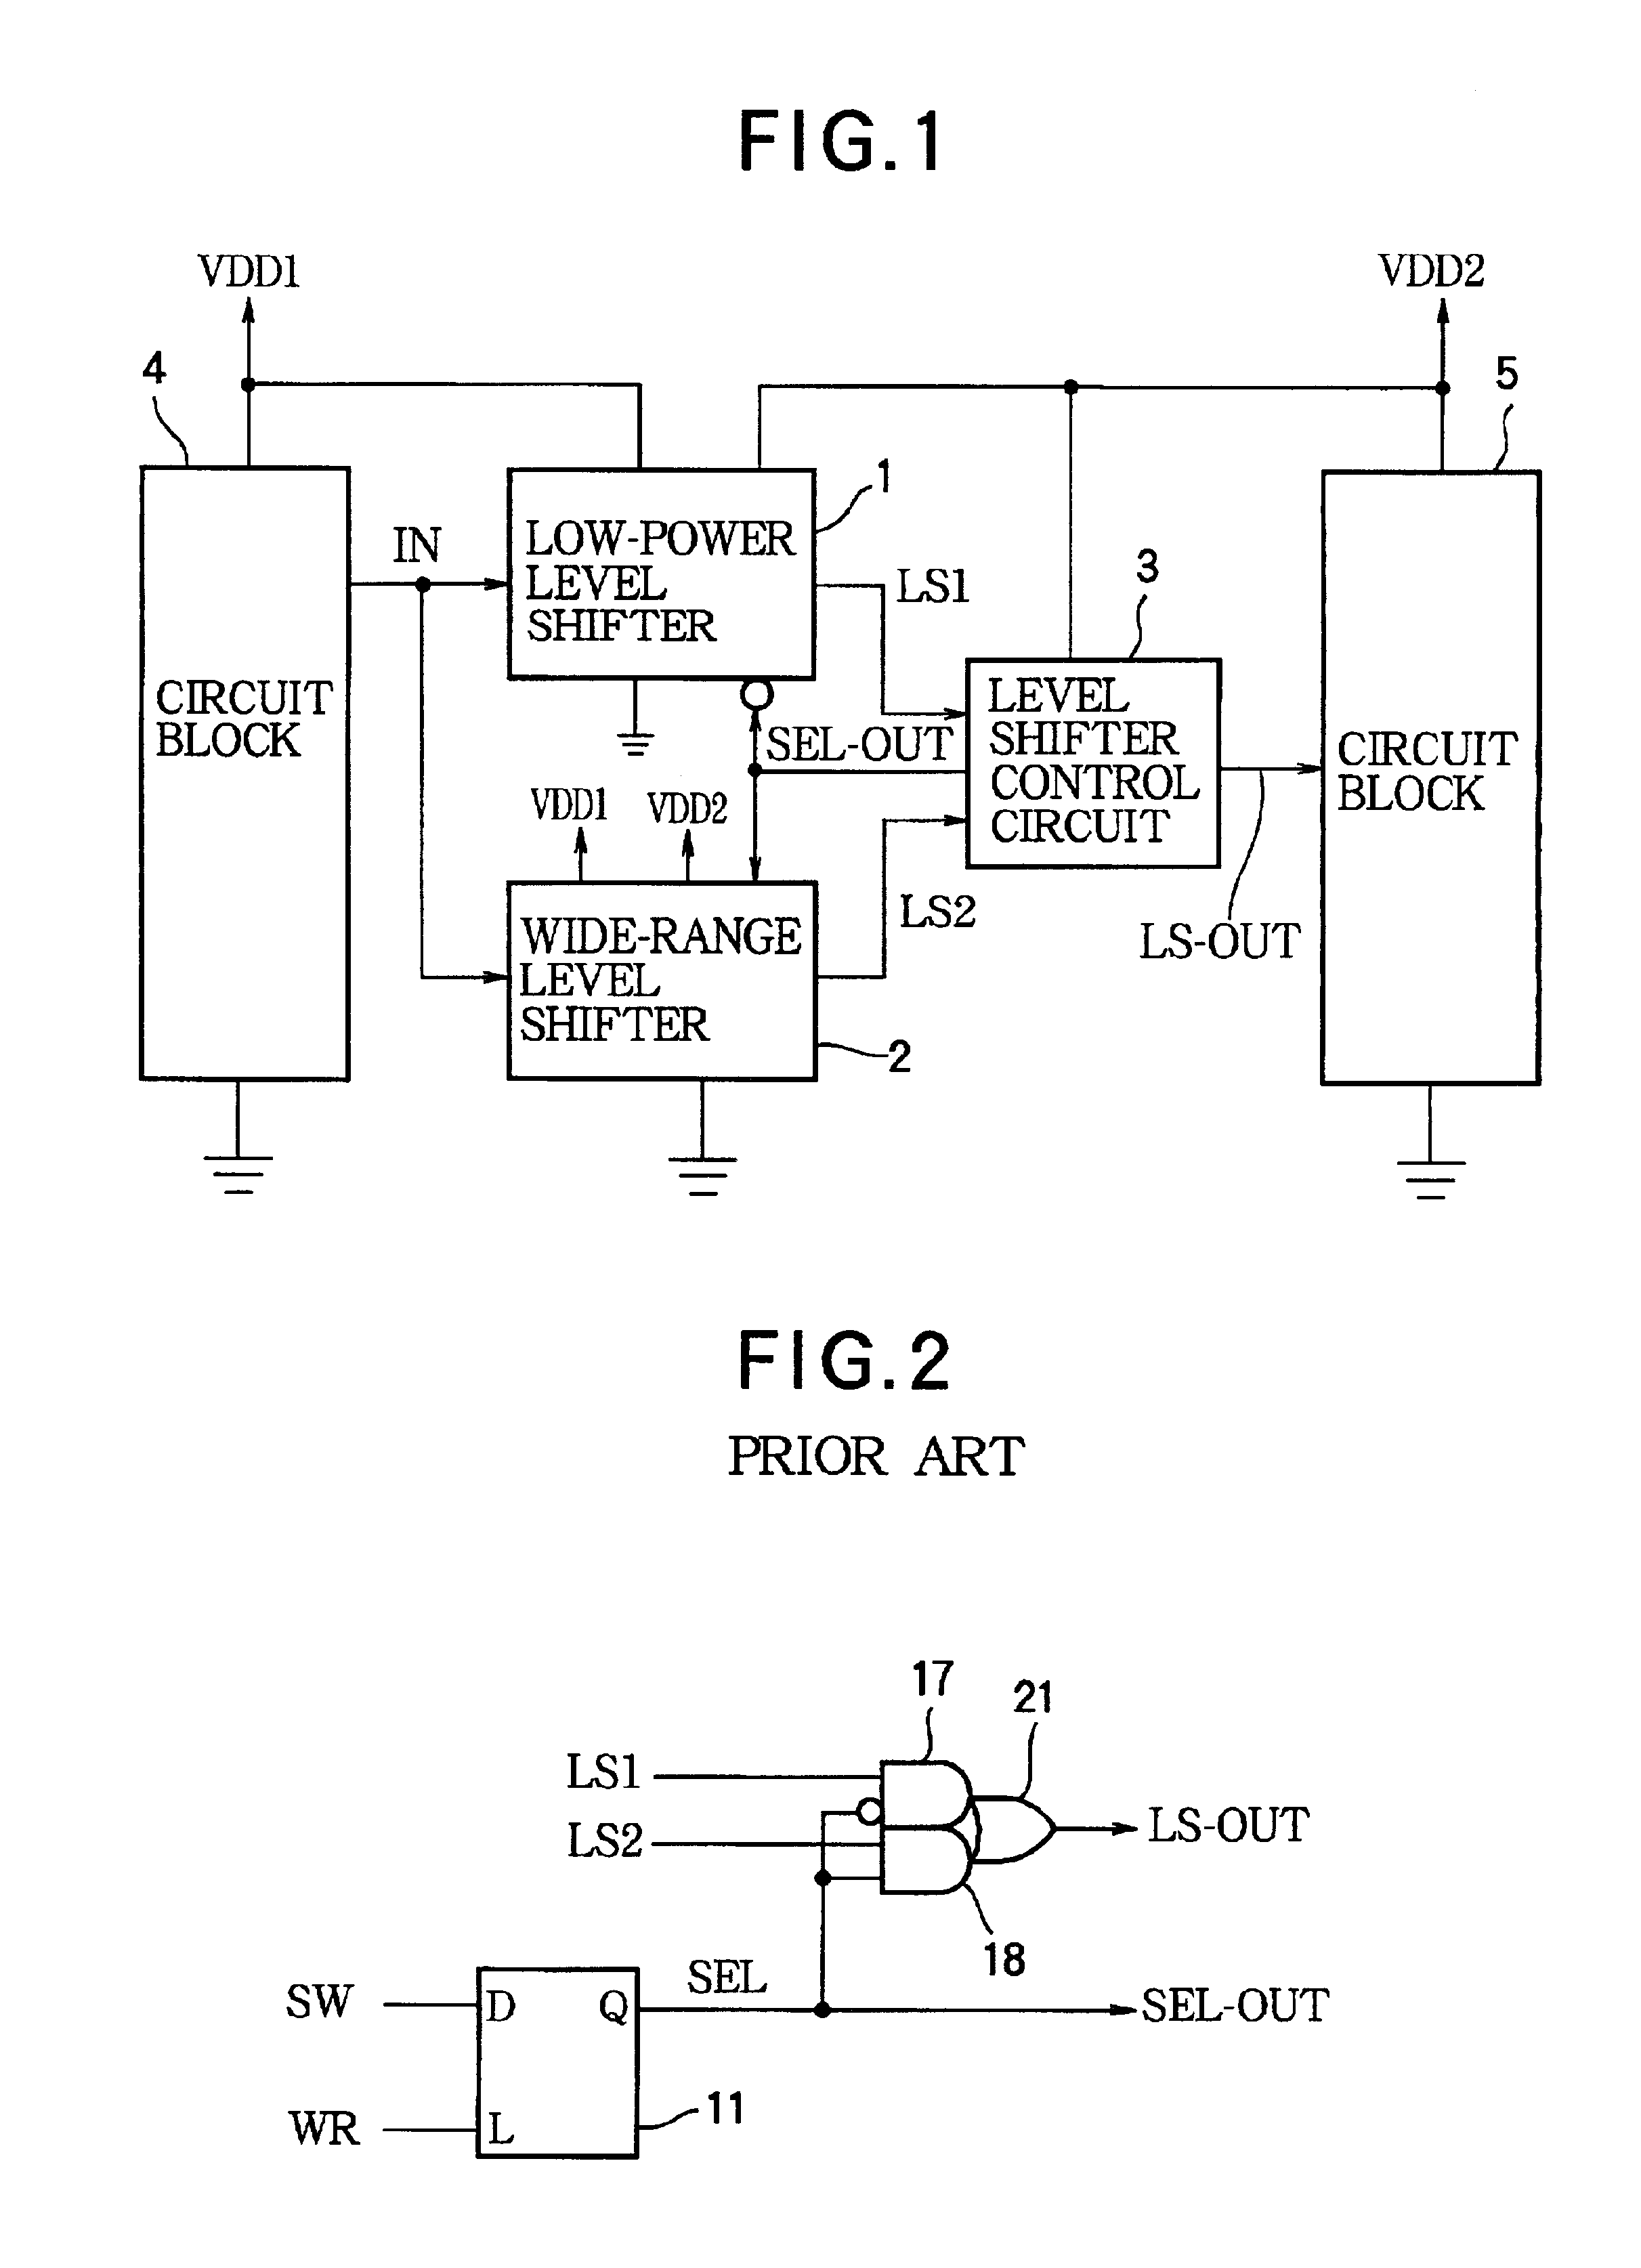 Level shifter control circuit with delayed switchover to low-power level shifter